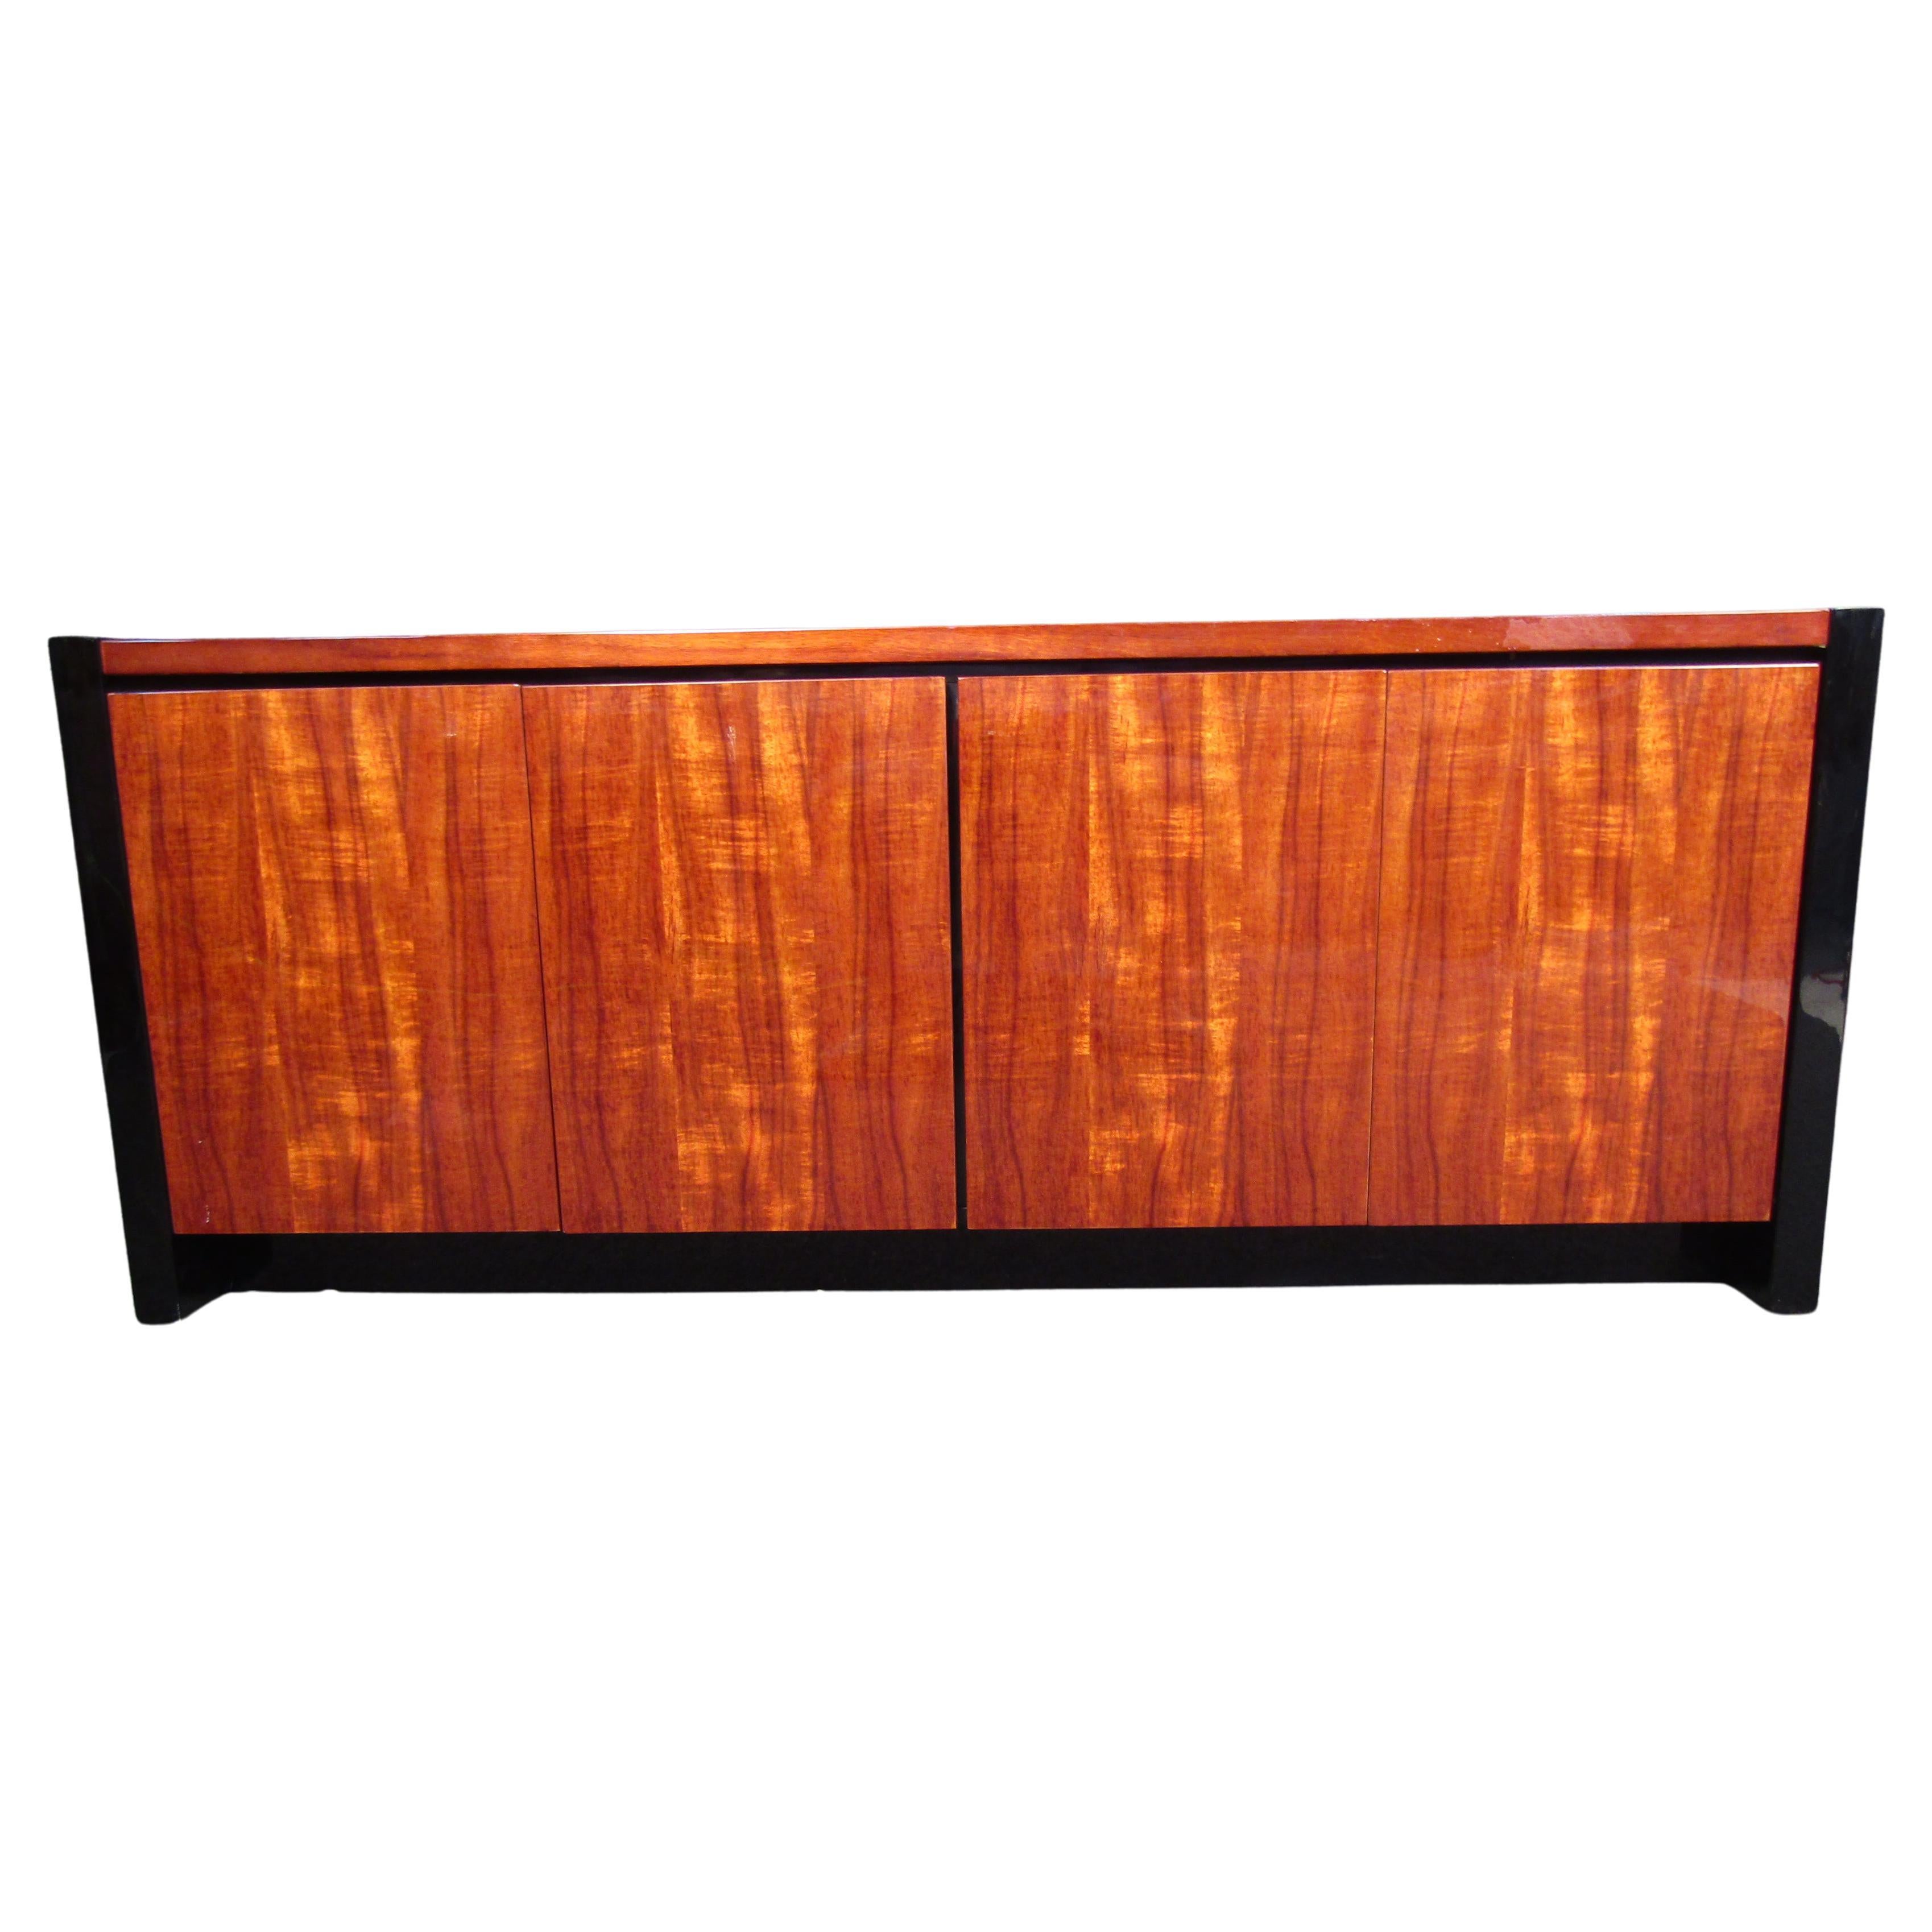 Gorgeous black lacquer and Hawaiian koa wood credenza from the Elan Collection by Henredon. The credenza features stunning and rare koa wood grain and clean, sleek lines. It offers ample room for storage, with three drawers and an adjustable shelf.